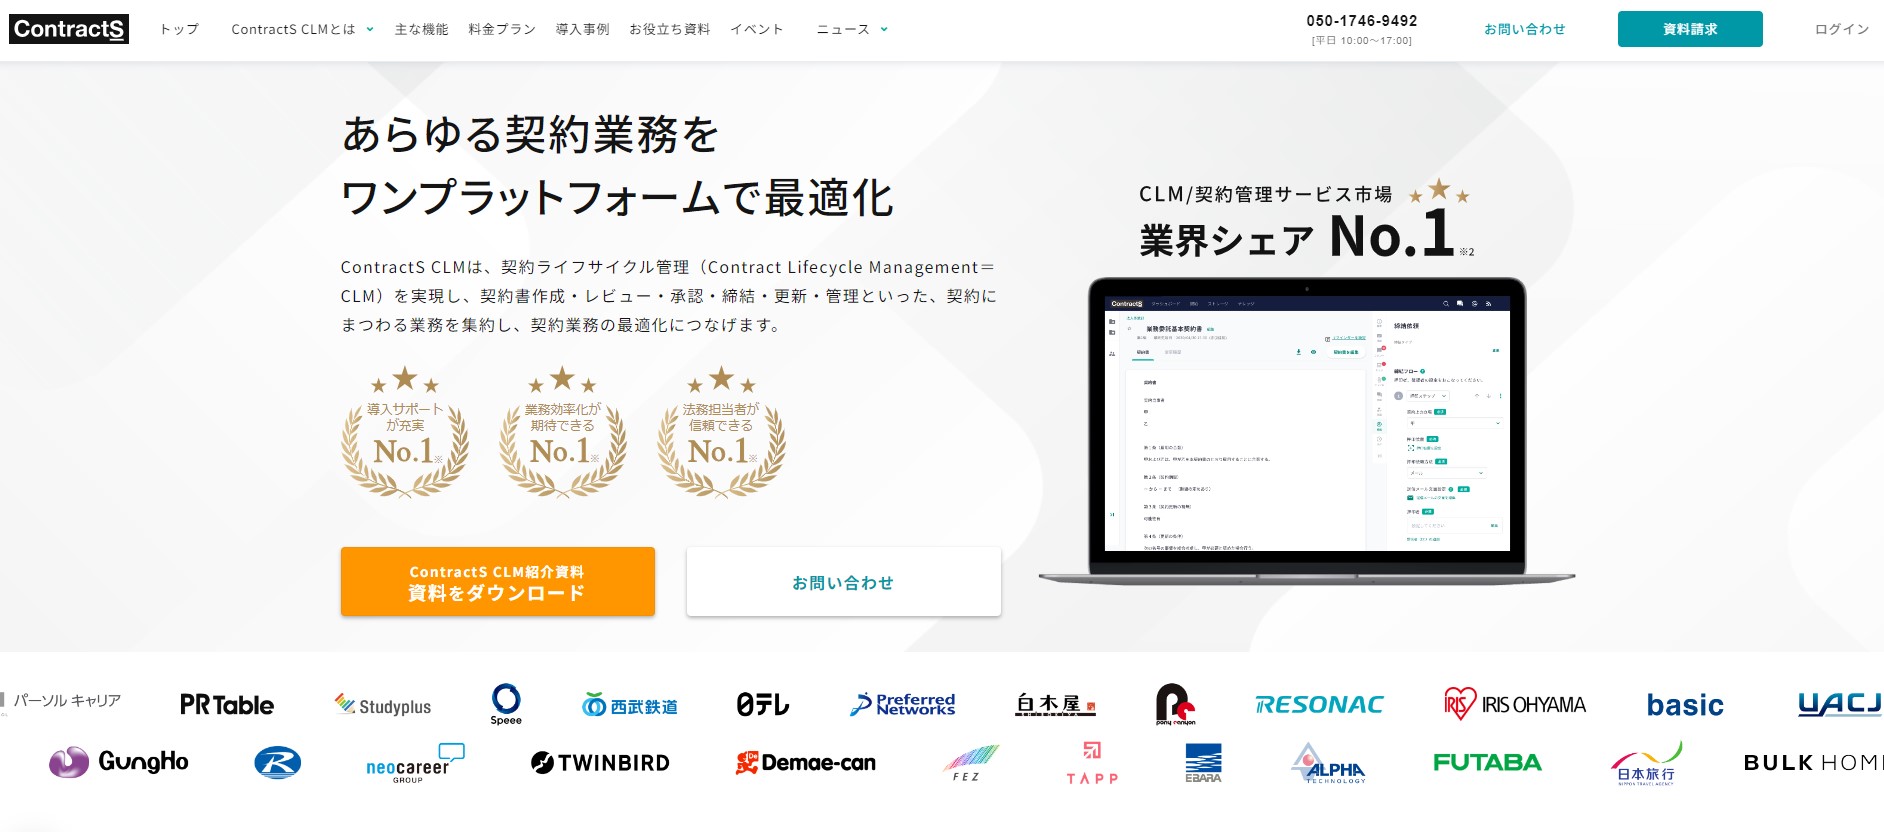 ContractS CLM公式サイト